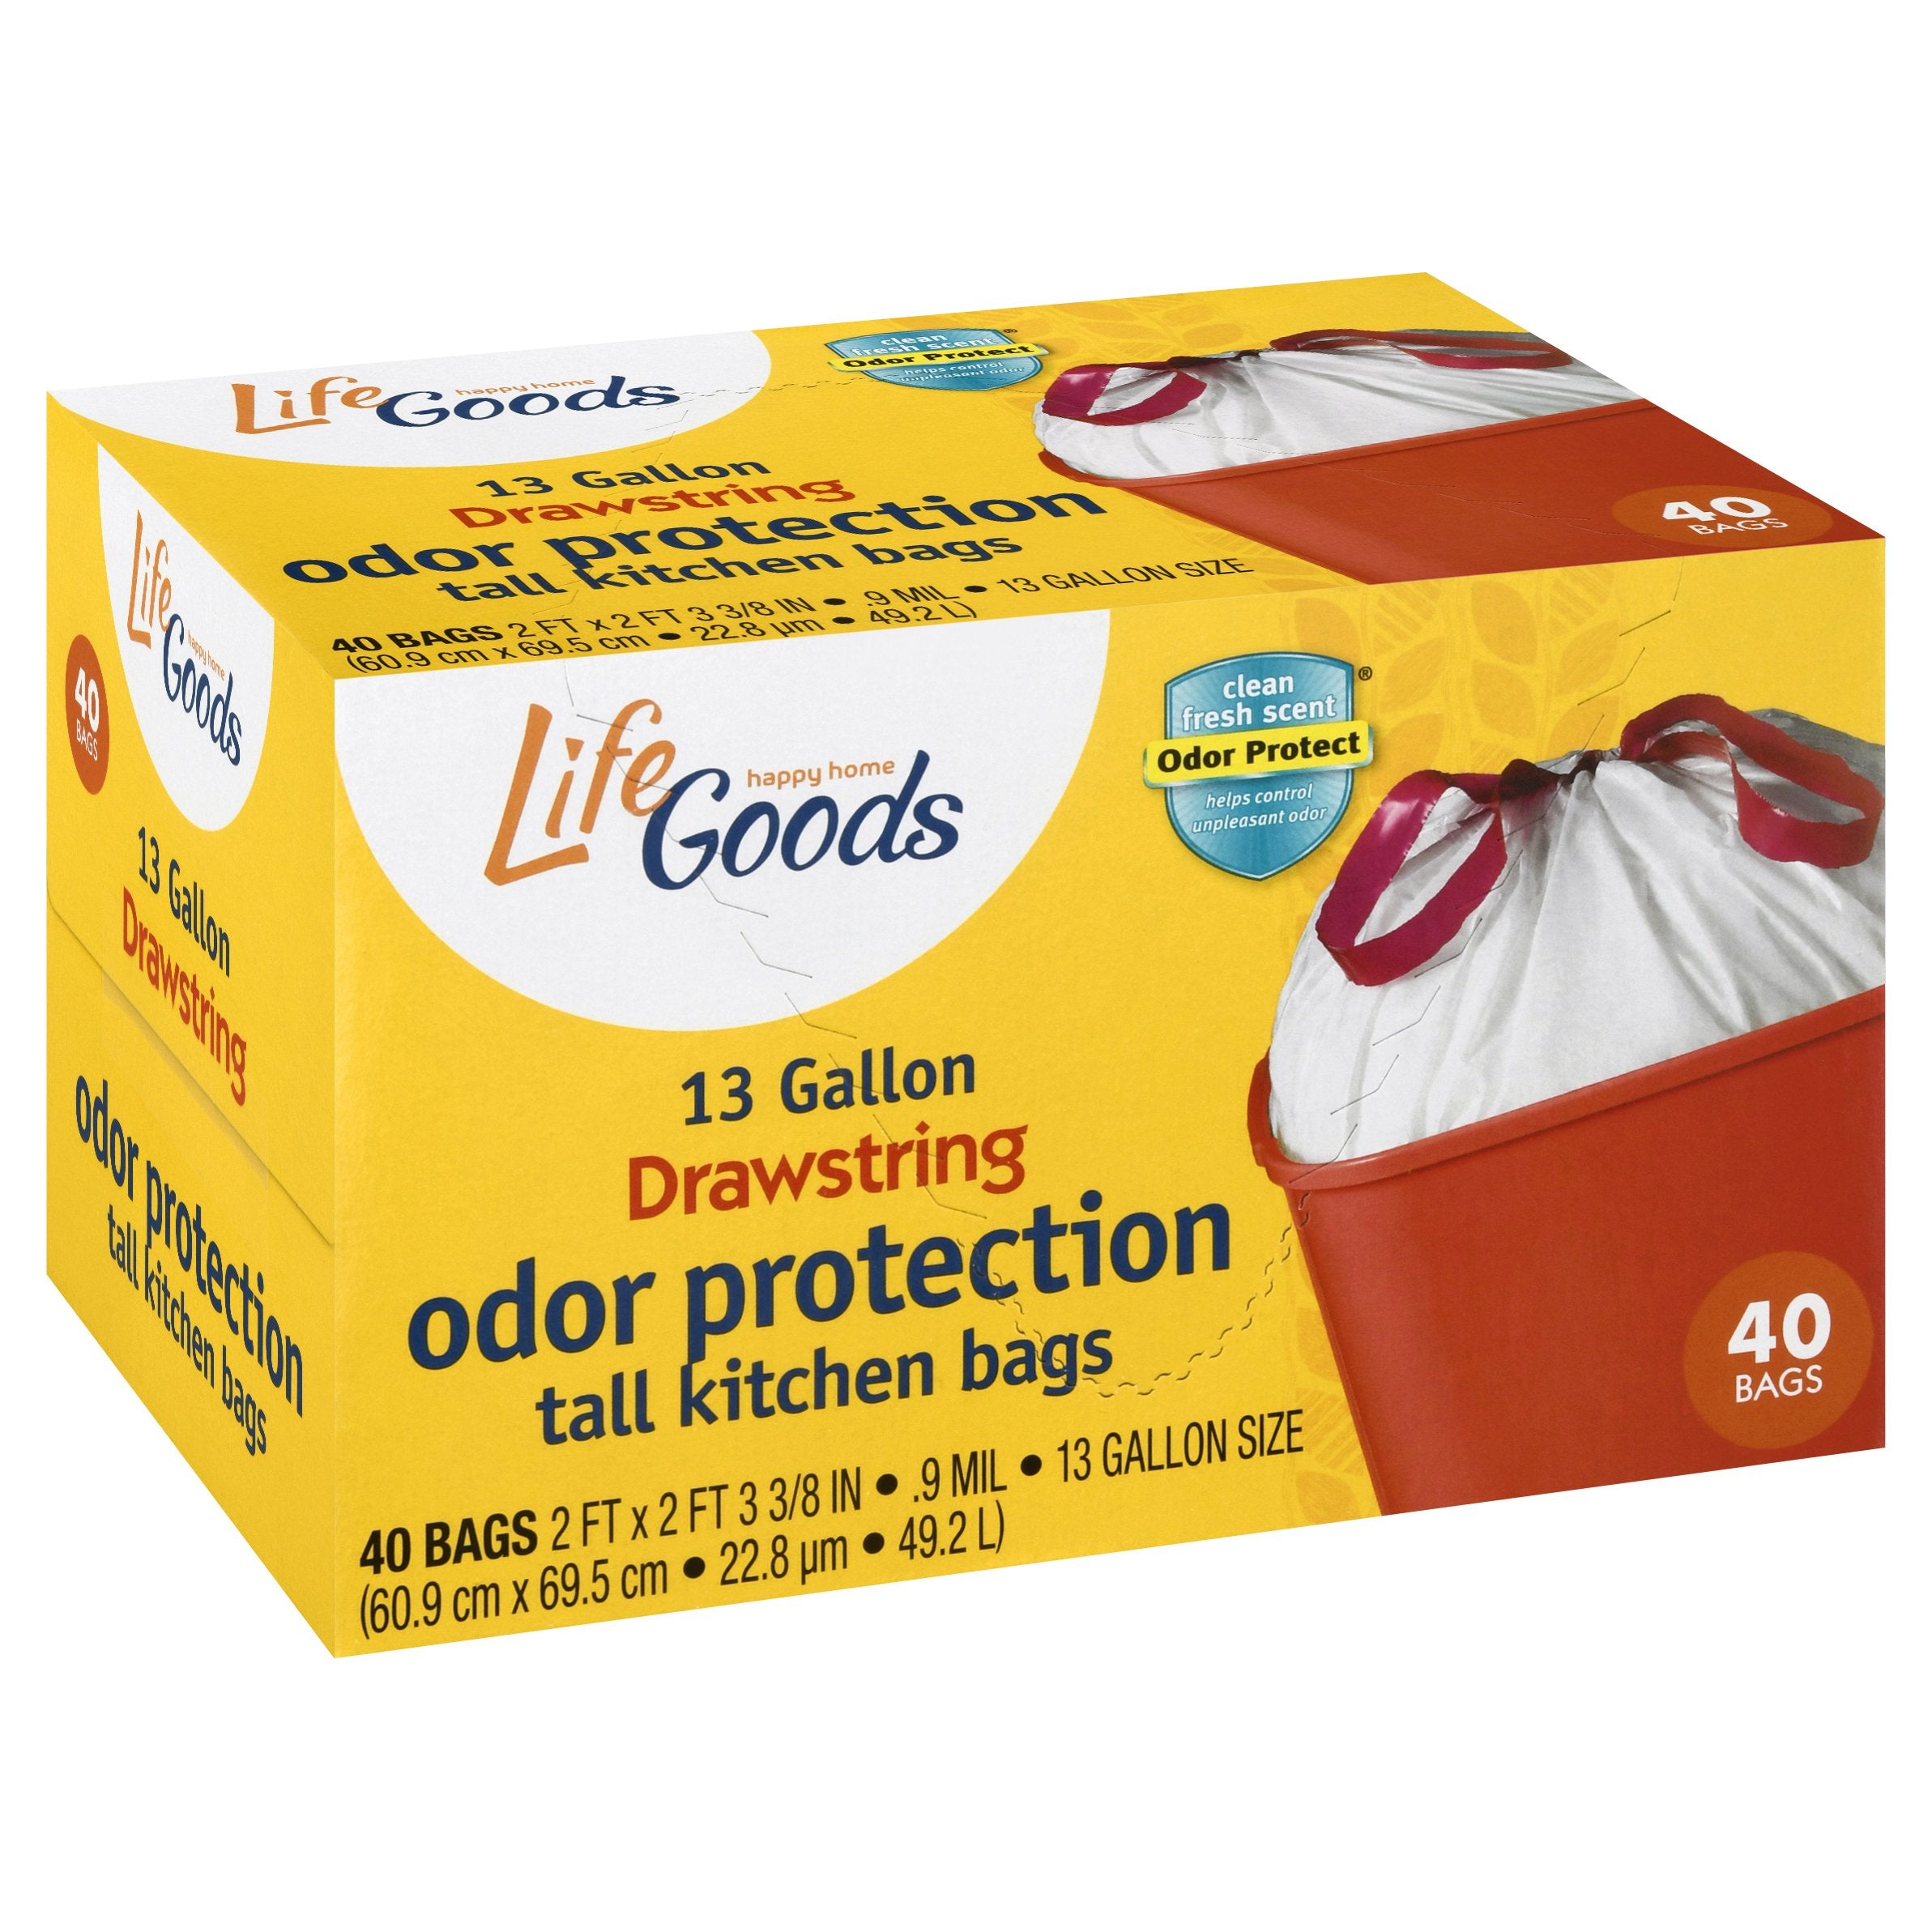 Life Goods Drawstring Odor Protection Tall Kitchen Bags - 40 CT 6